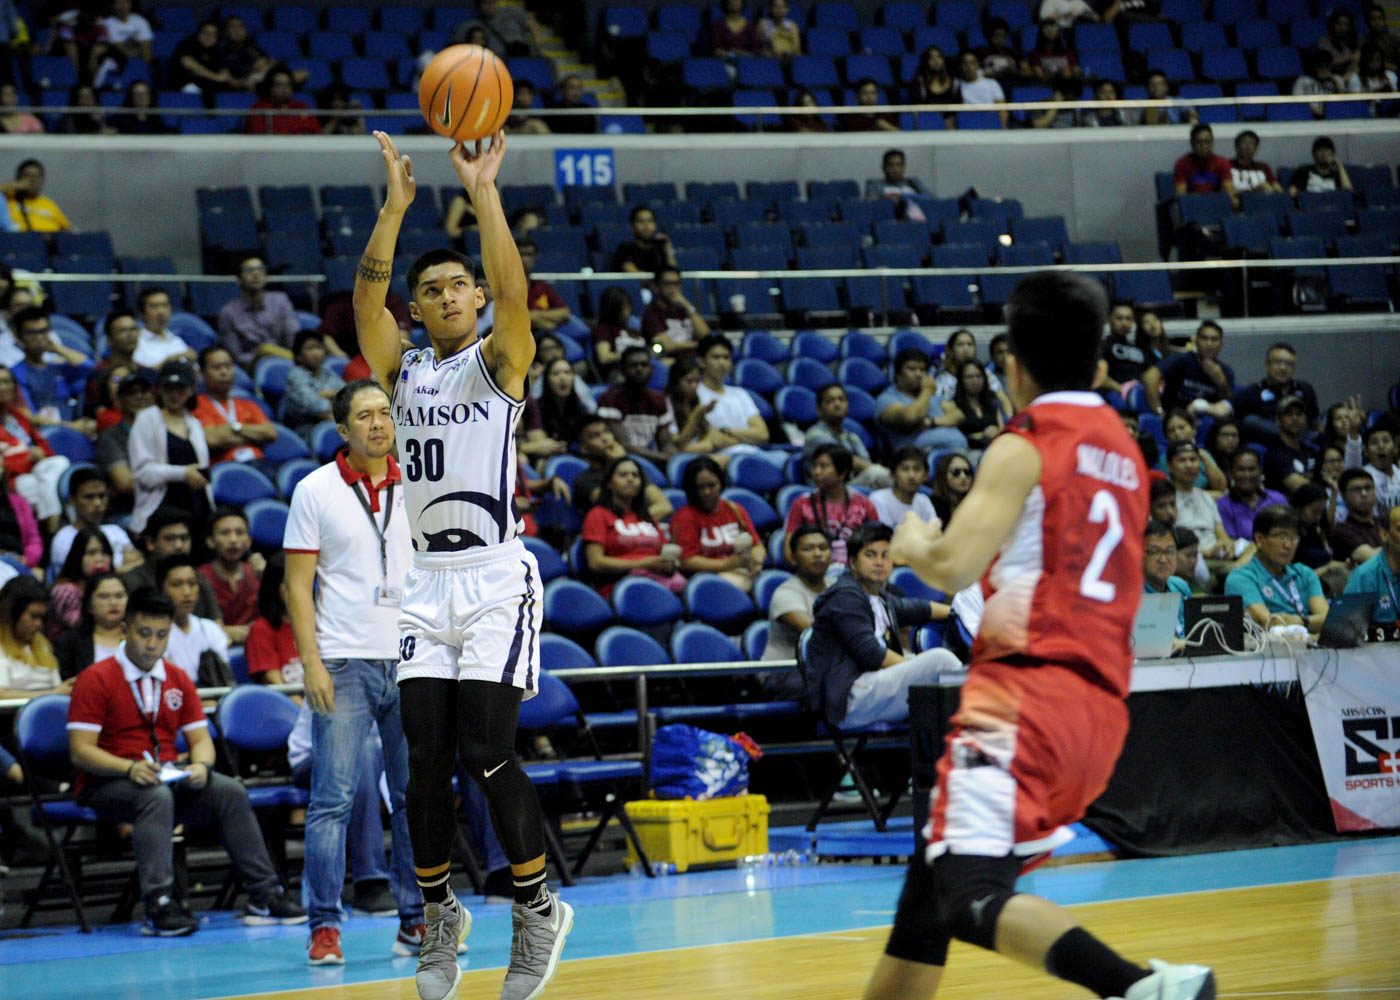 Soaring Falcons earn first double-digit win against Red Warriors